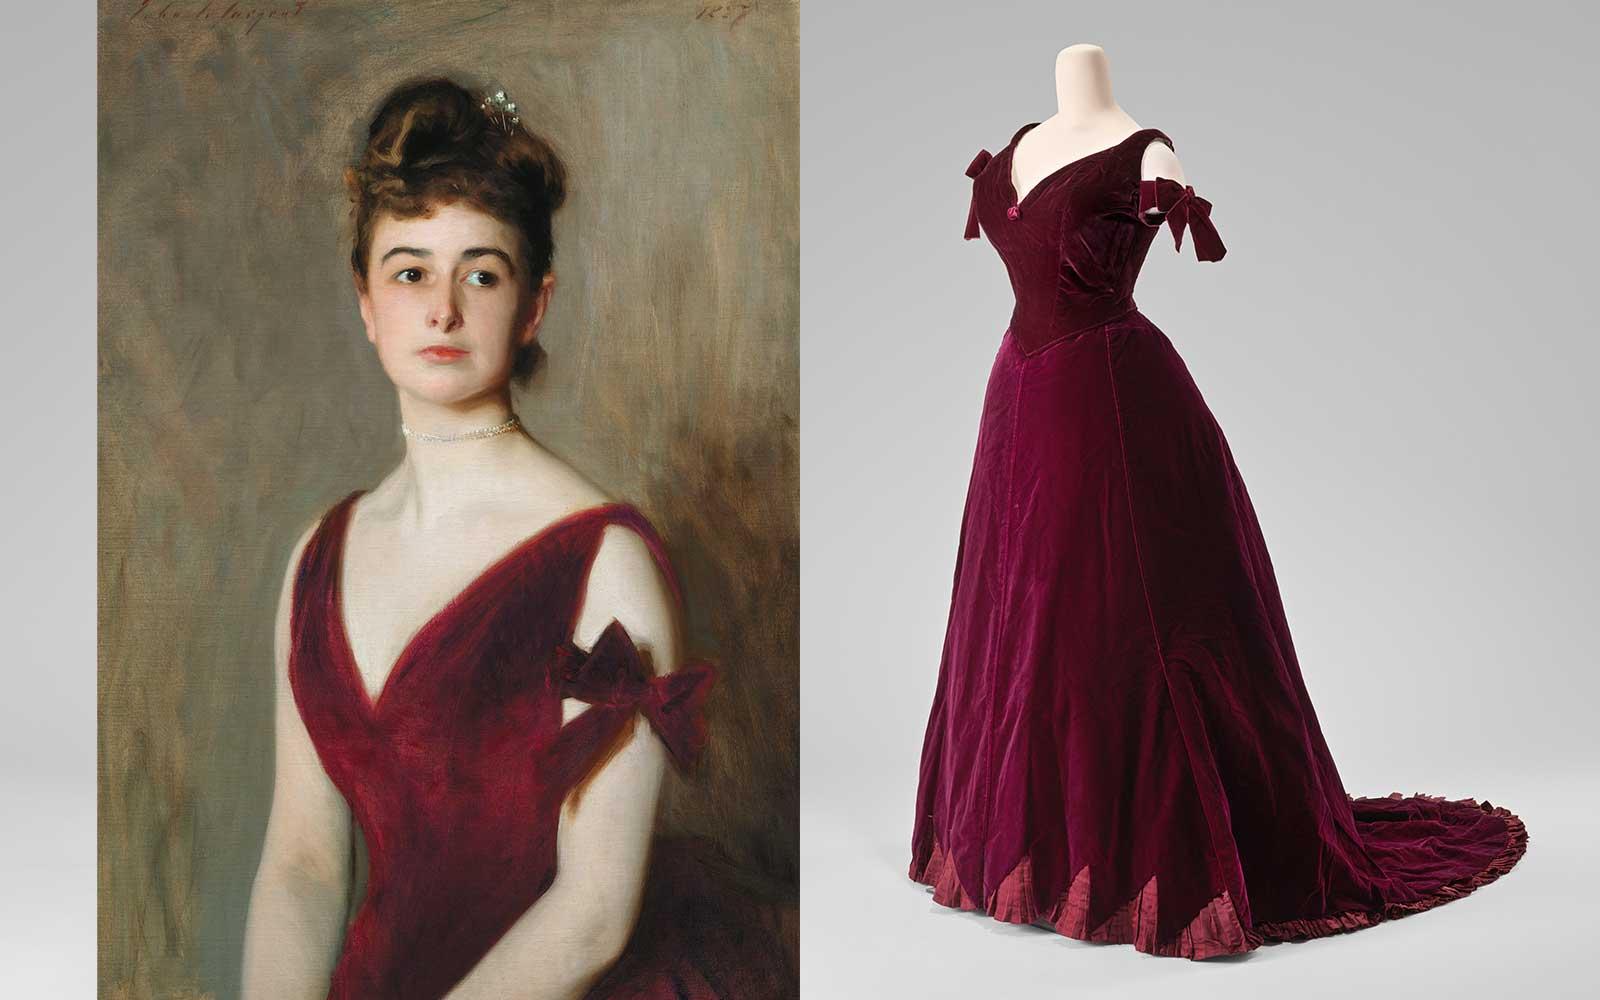 Mrs. Charles E. Inches by John Singer Sargent, 1887.